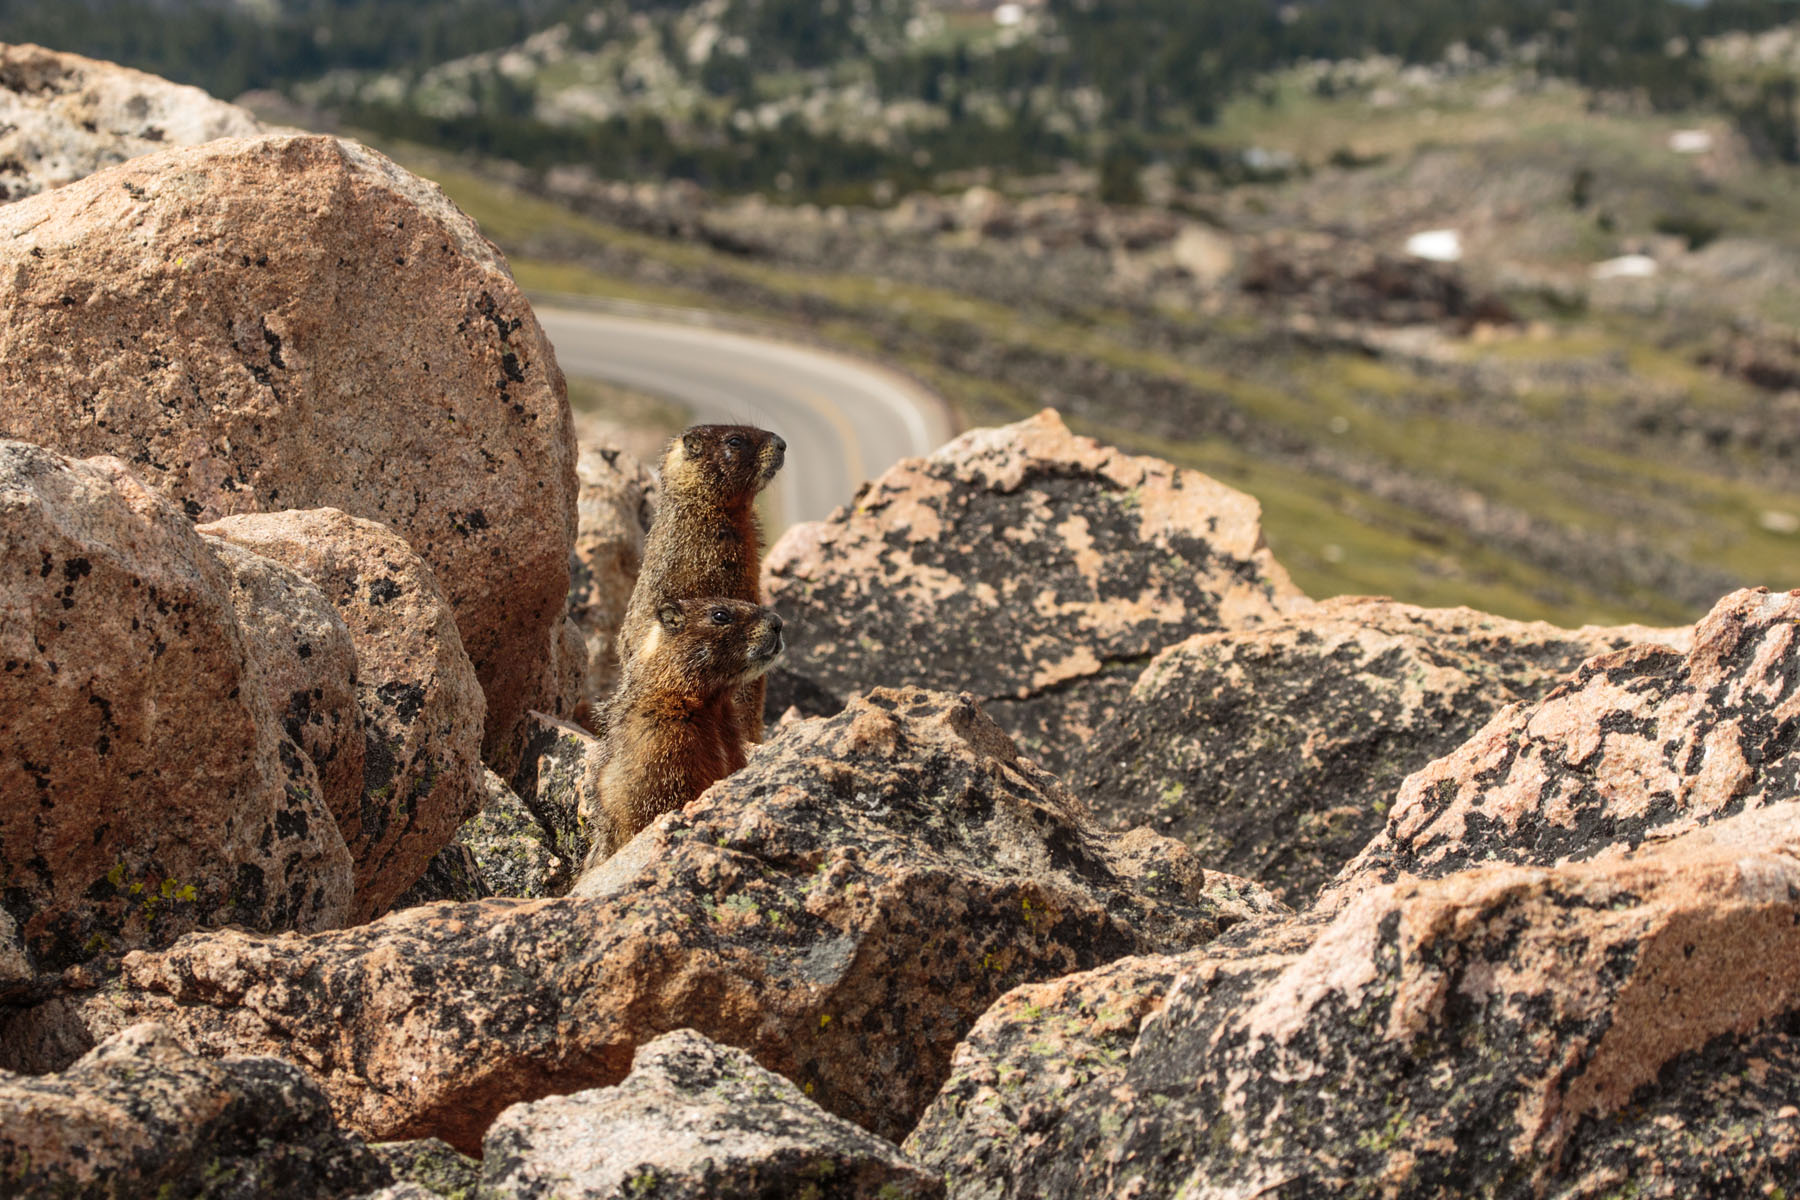 Marmots on alert as predator flies over, Beartooth Highway, Wyoming.  Click for next photo.